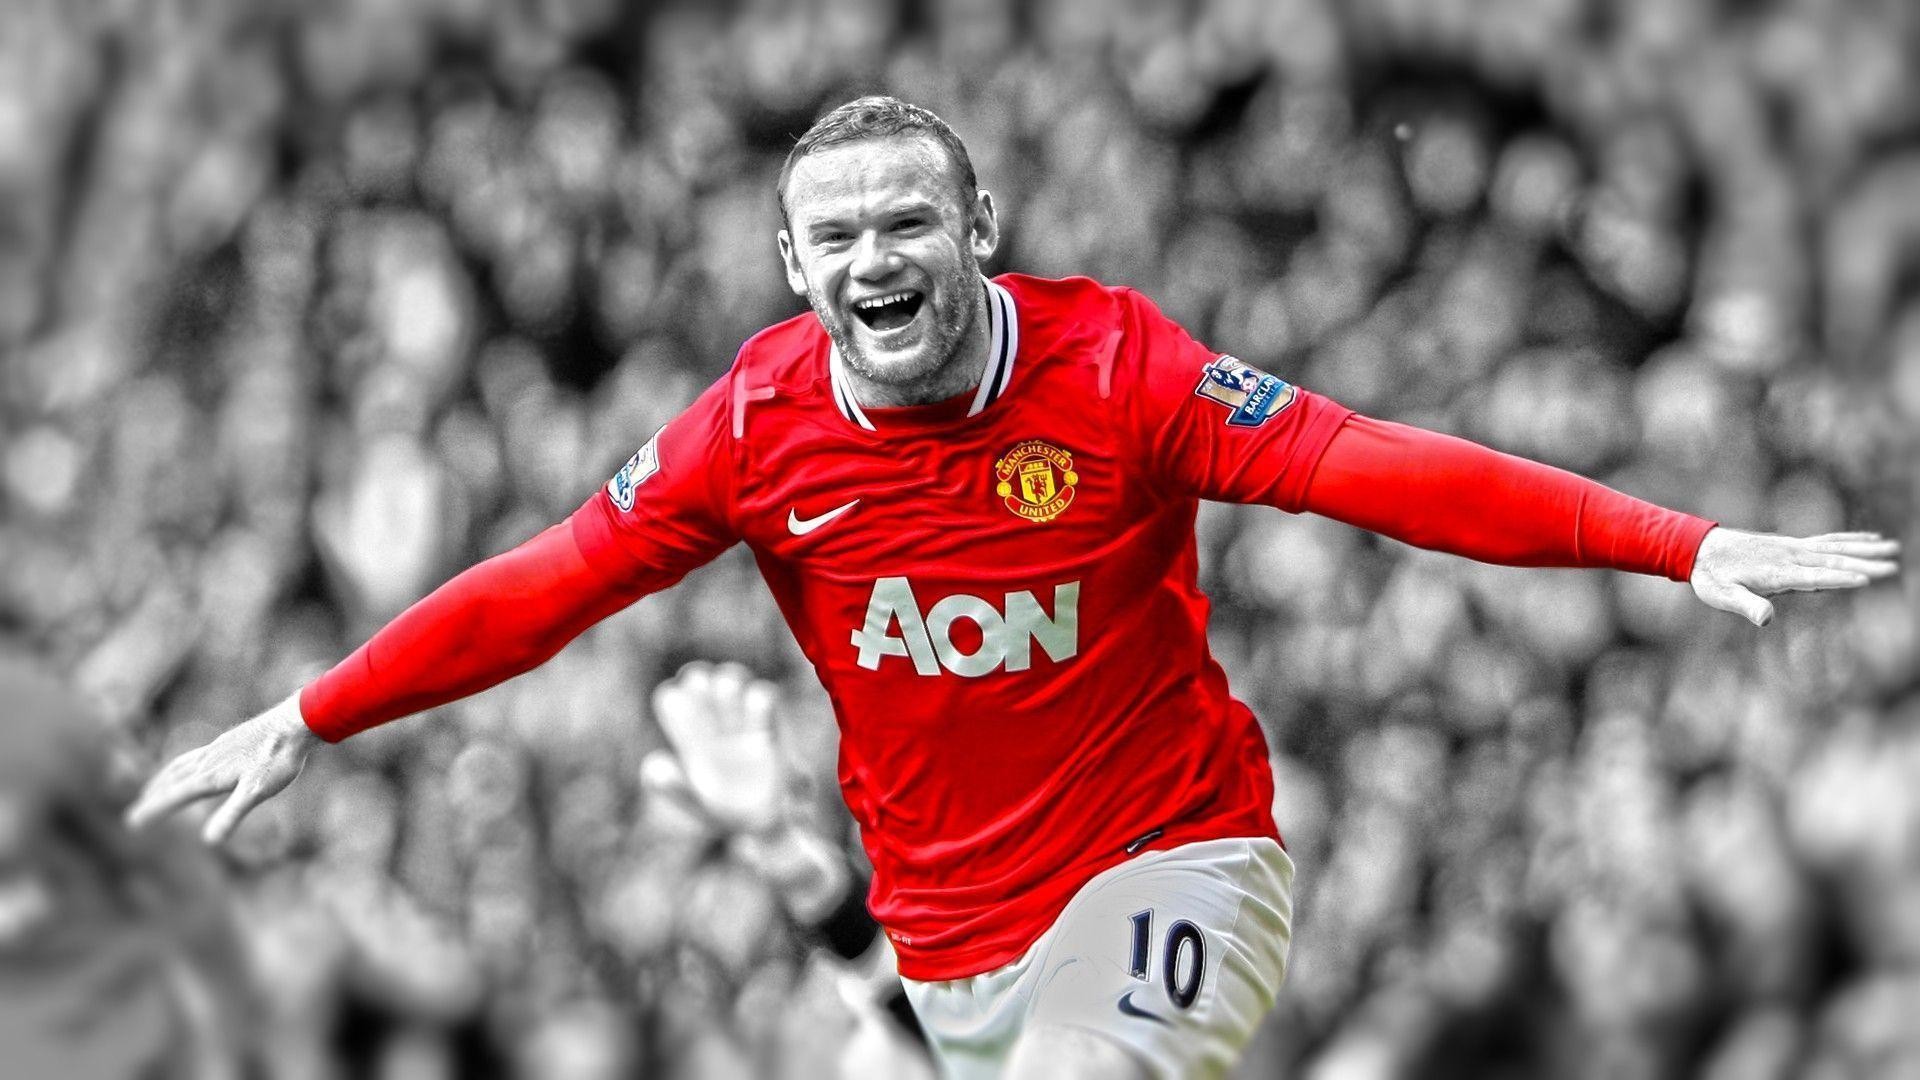 1920x1080 Wayne Rooney wallpaper and Theme for Windows | All for Windows 10 Free